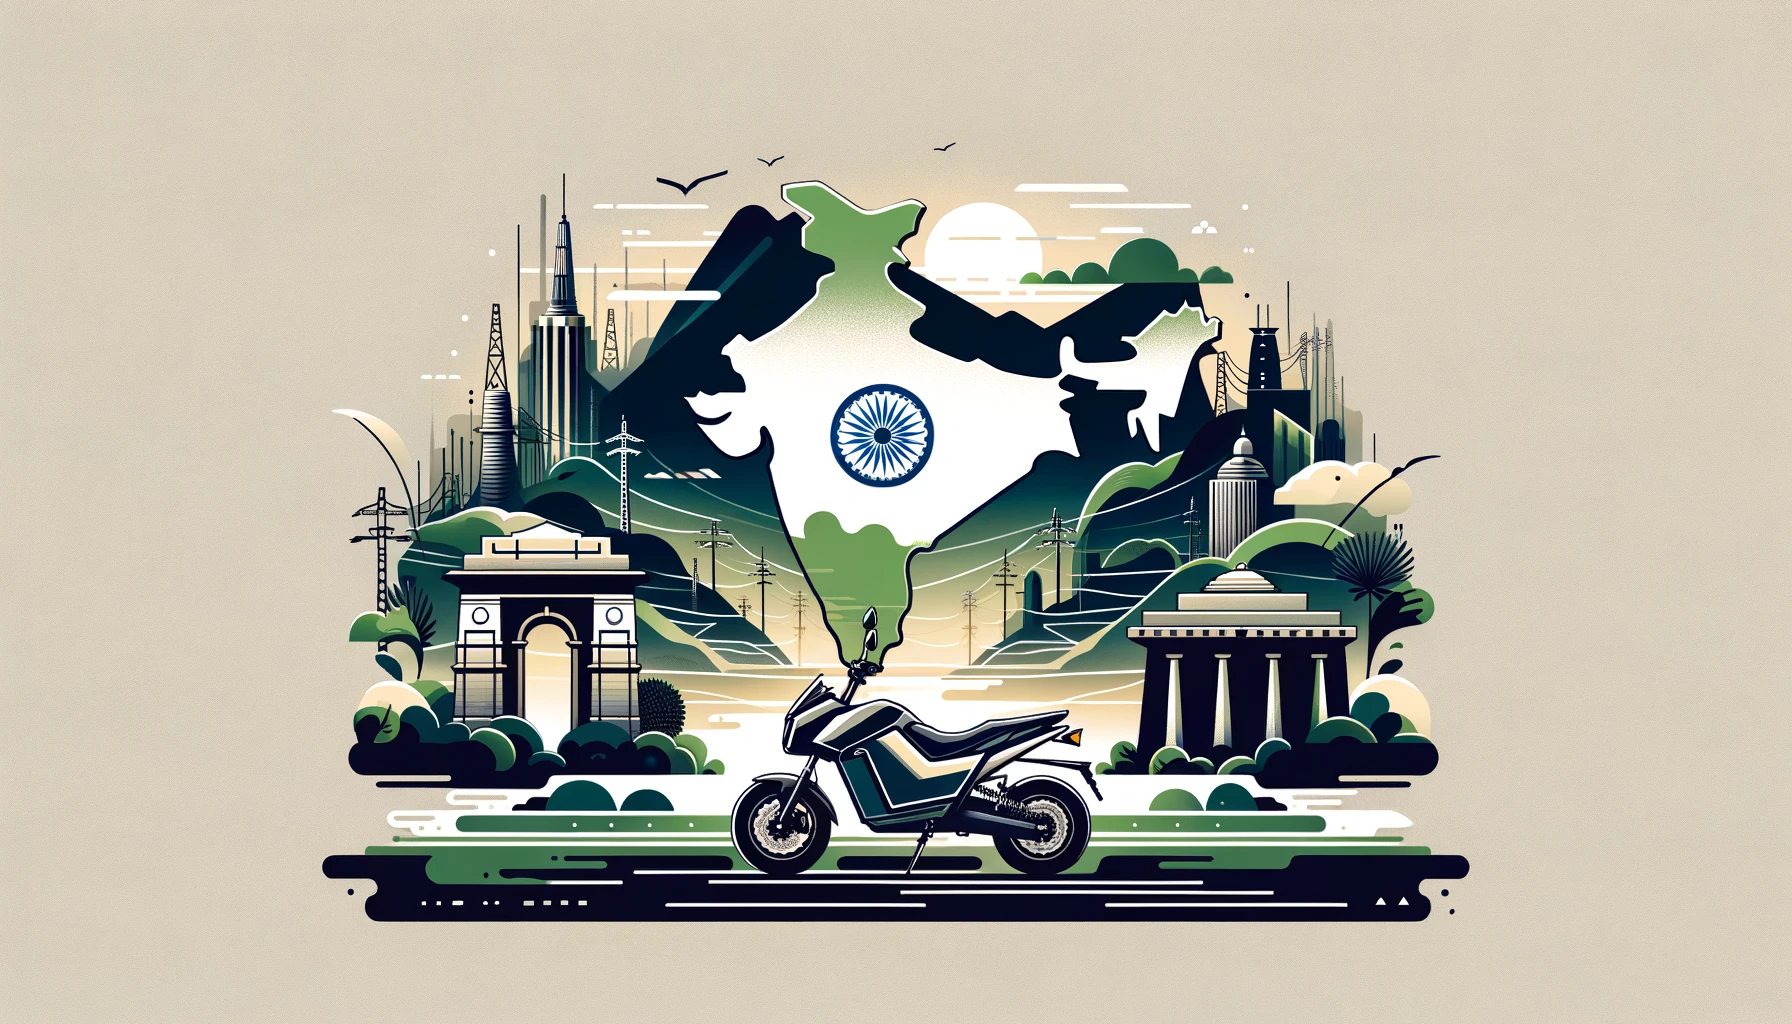 River’s Electric Revolution: Securing a Whopping $40 Million to better Redefine Urban Mobility in India